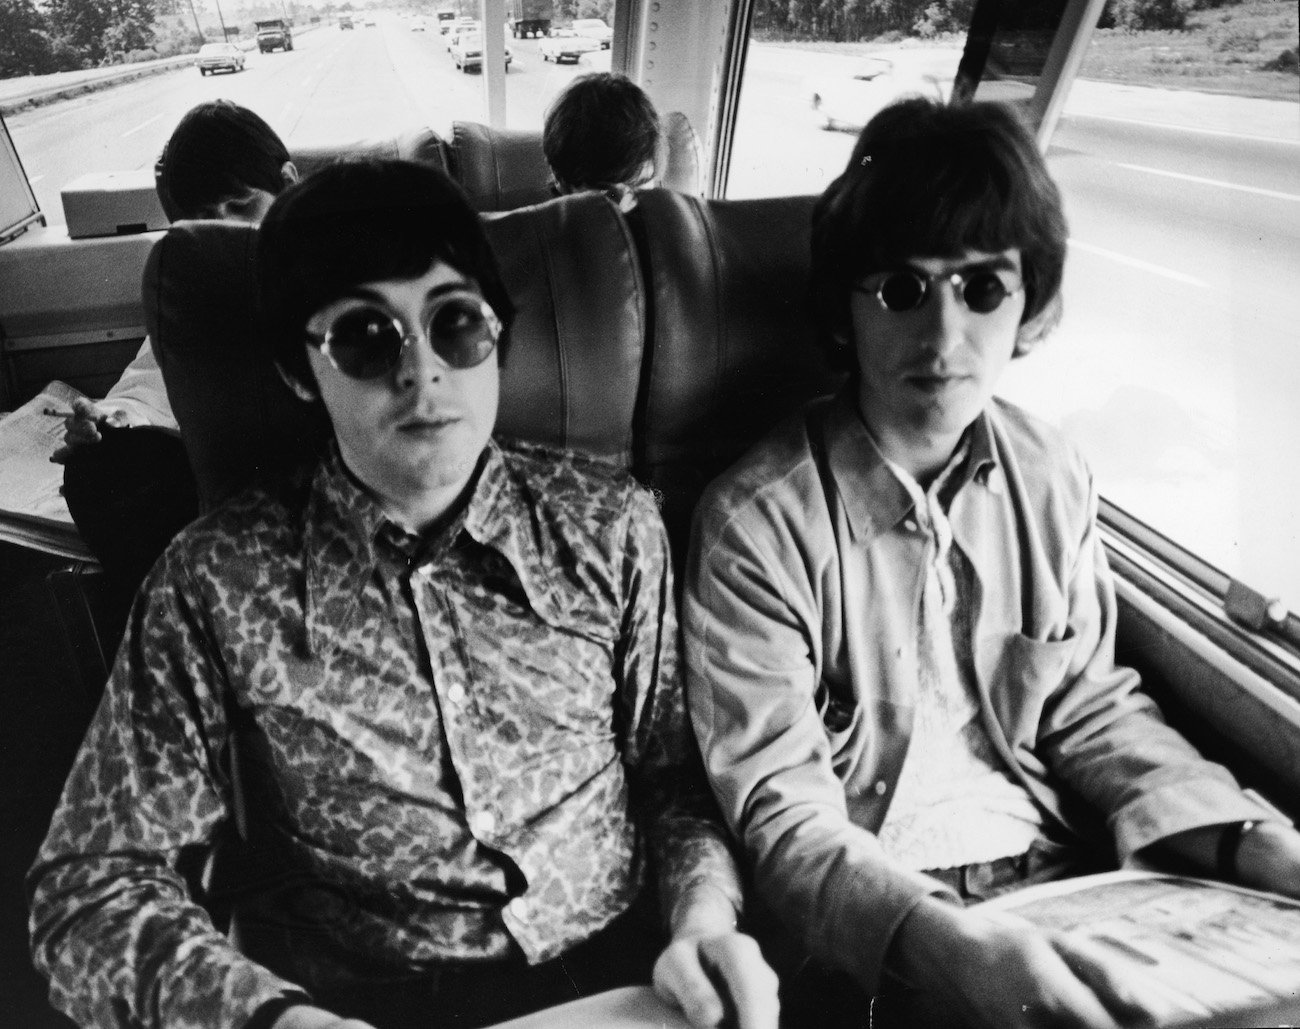 Paul McCartney and George Harrison on tour in 1966.